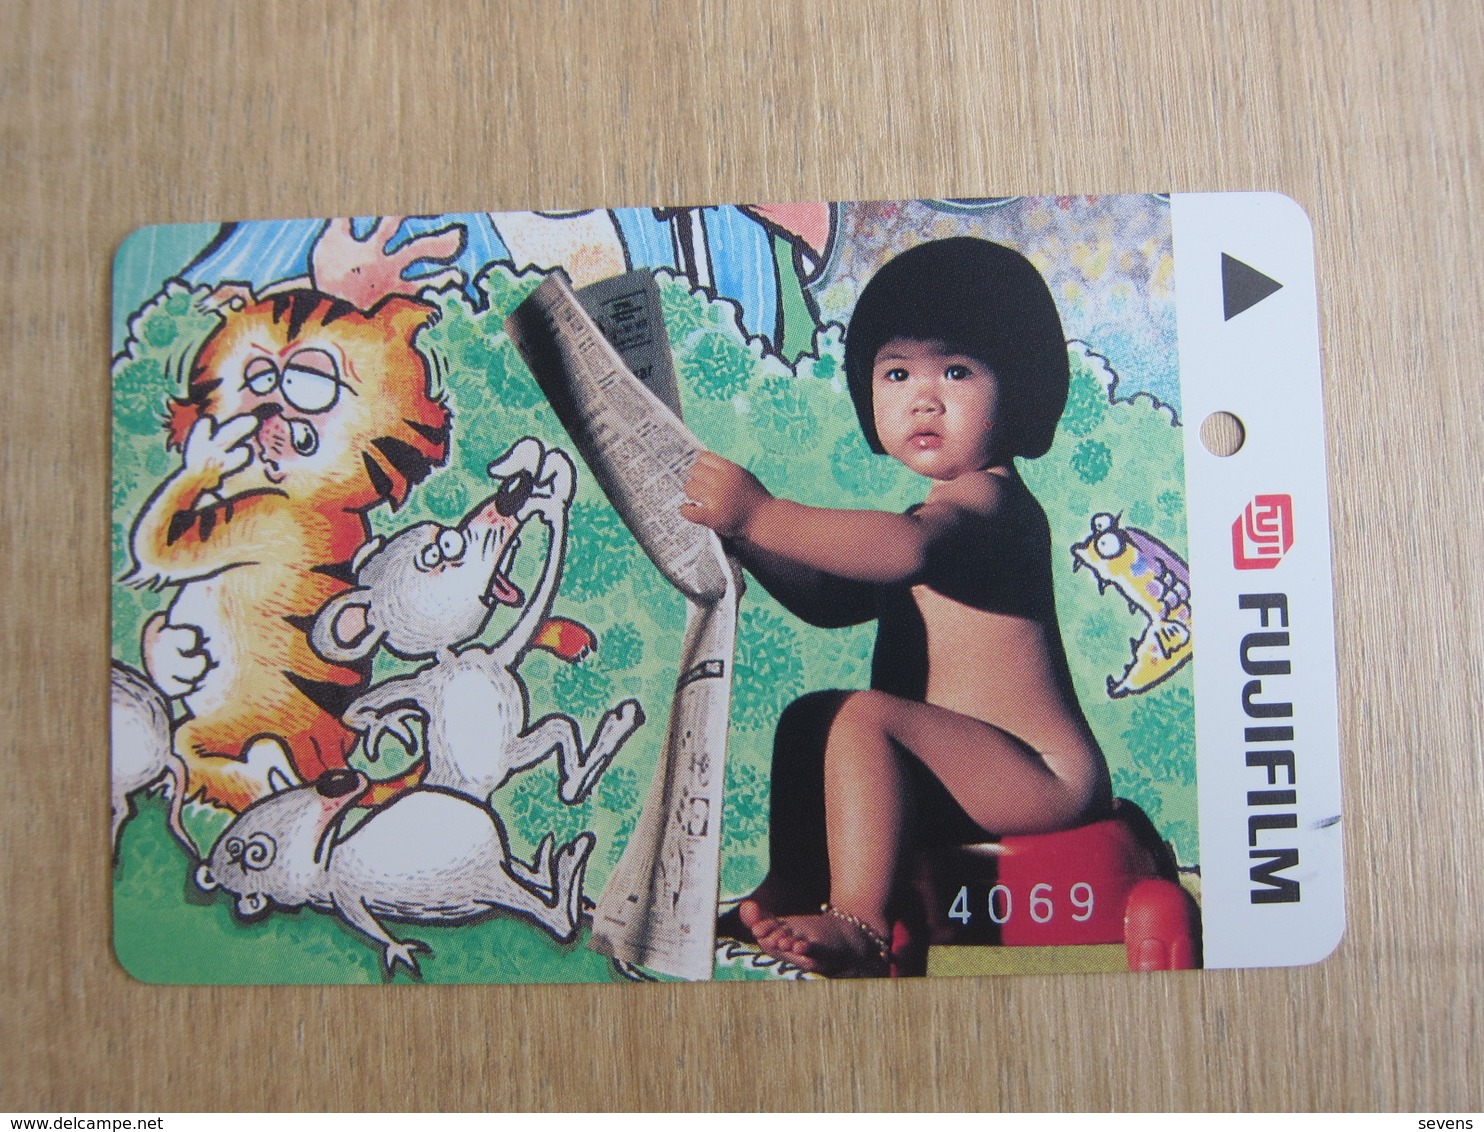 Transitlink Adult Fare Metro Ticket,Fuji Film, Baby And Cartoon Cat And Rats Painting - Singapore